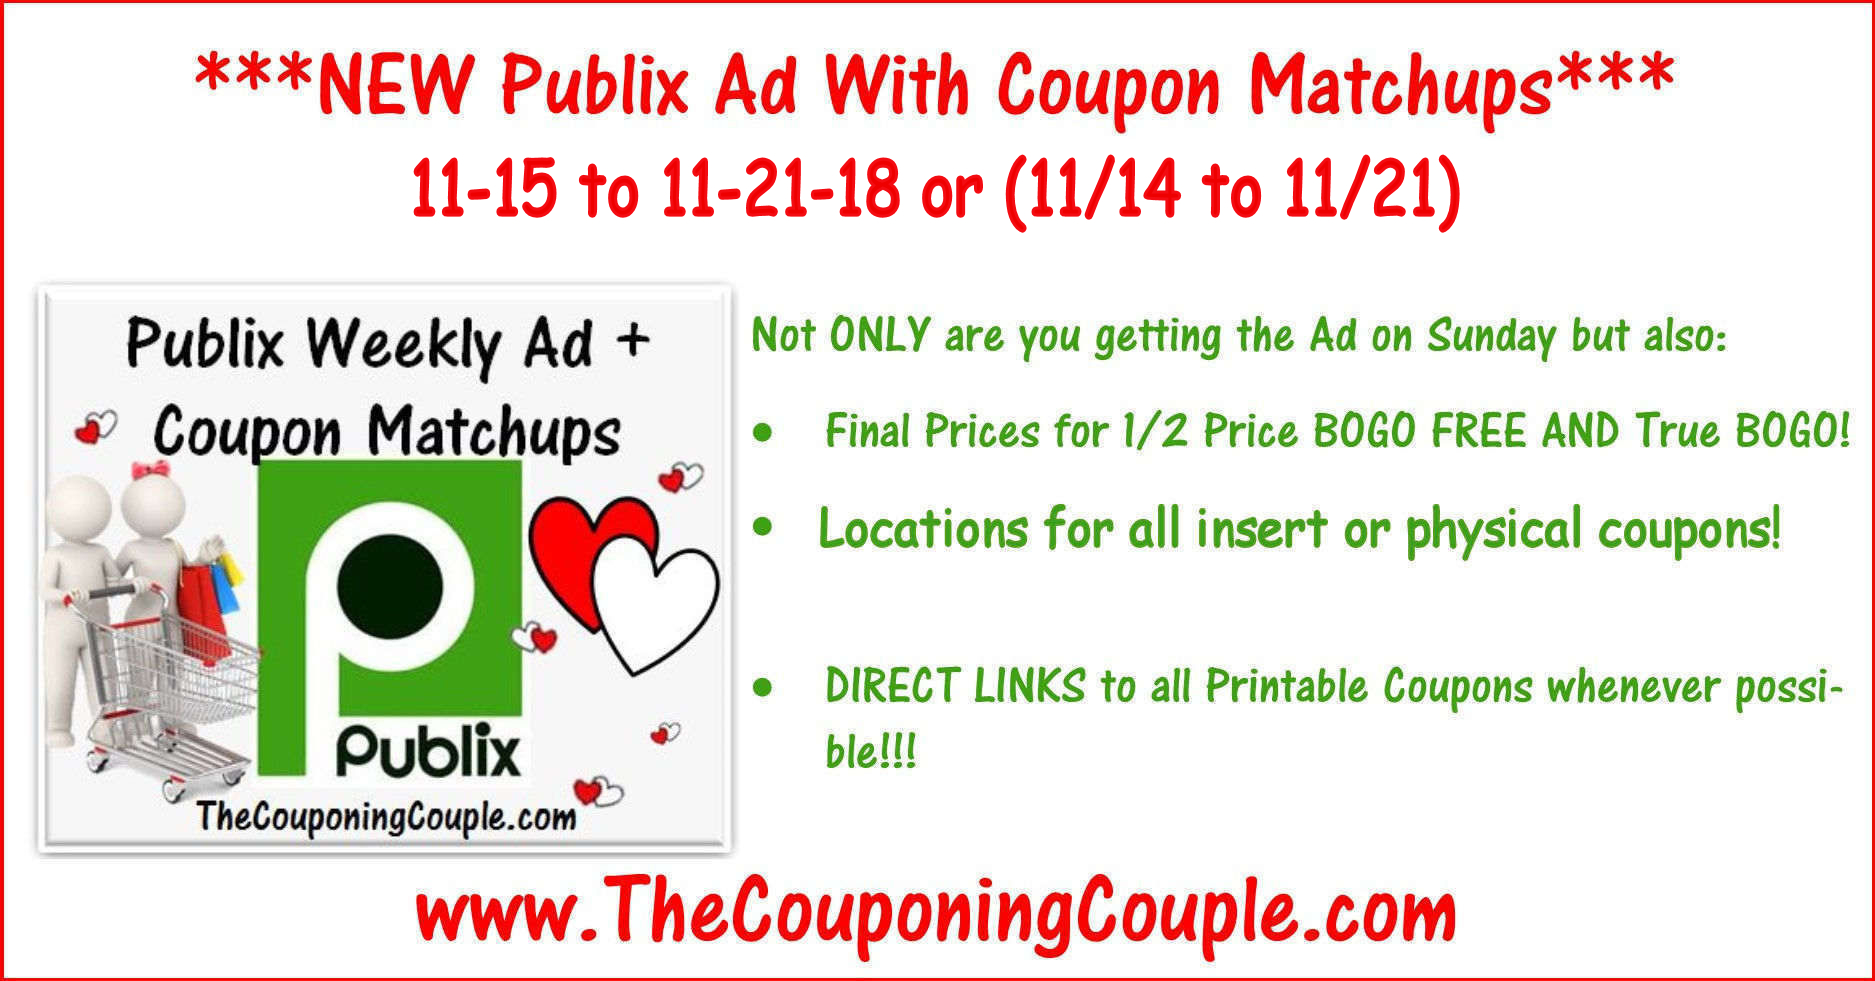 Publix Coupon Matchups For 11-15 To 11-21-18 Or (11/14 To 11/21 - Free Printable Chinet Coupons